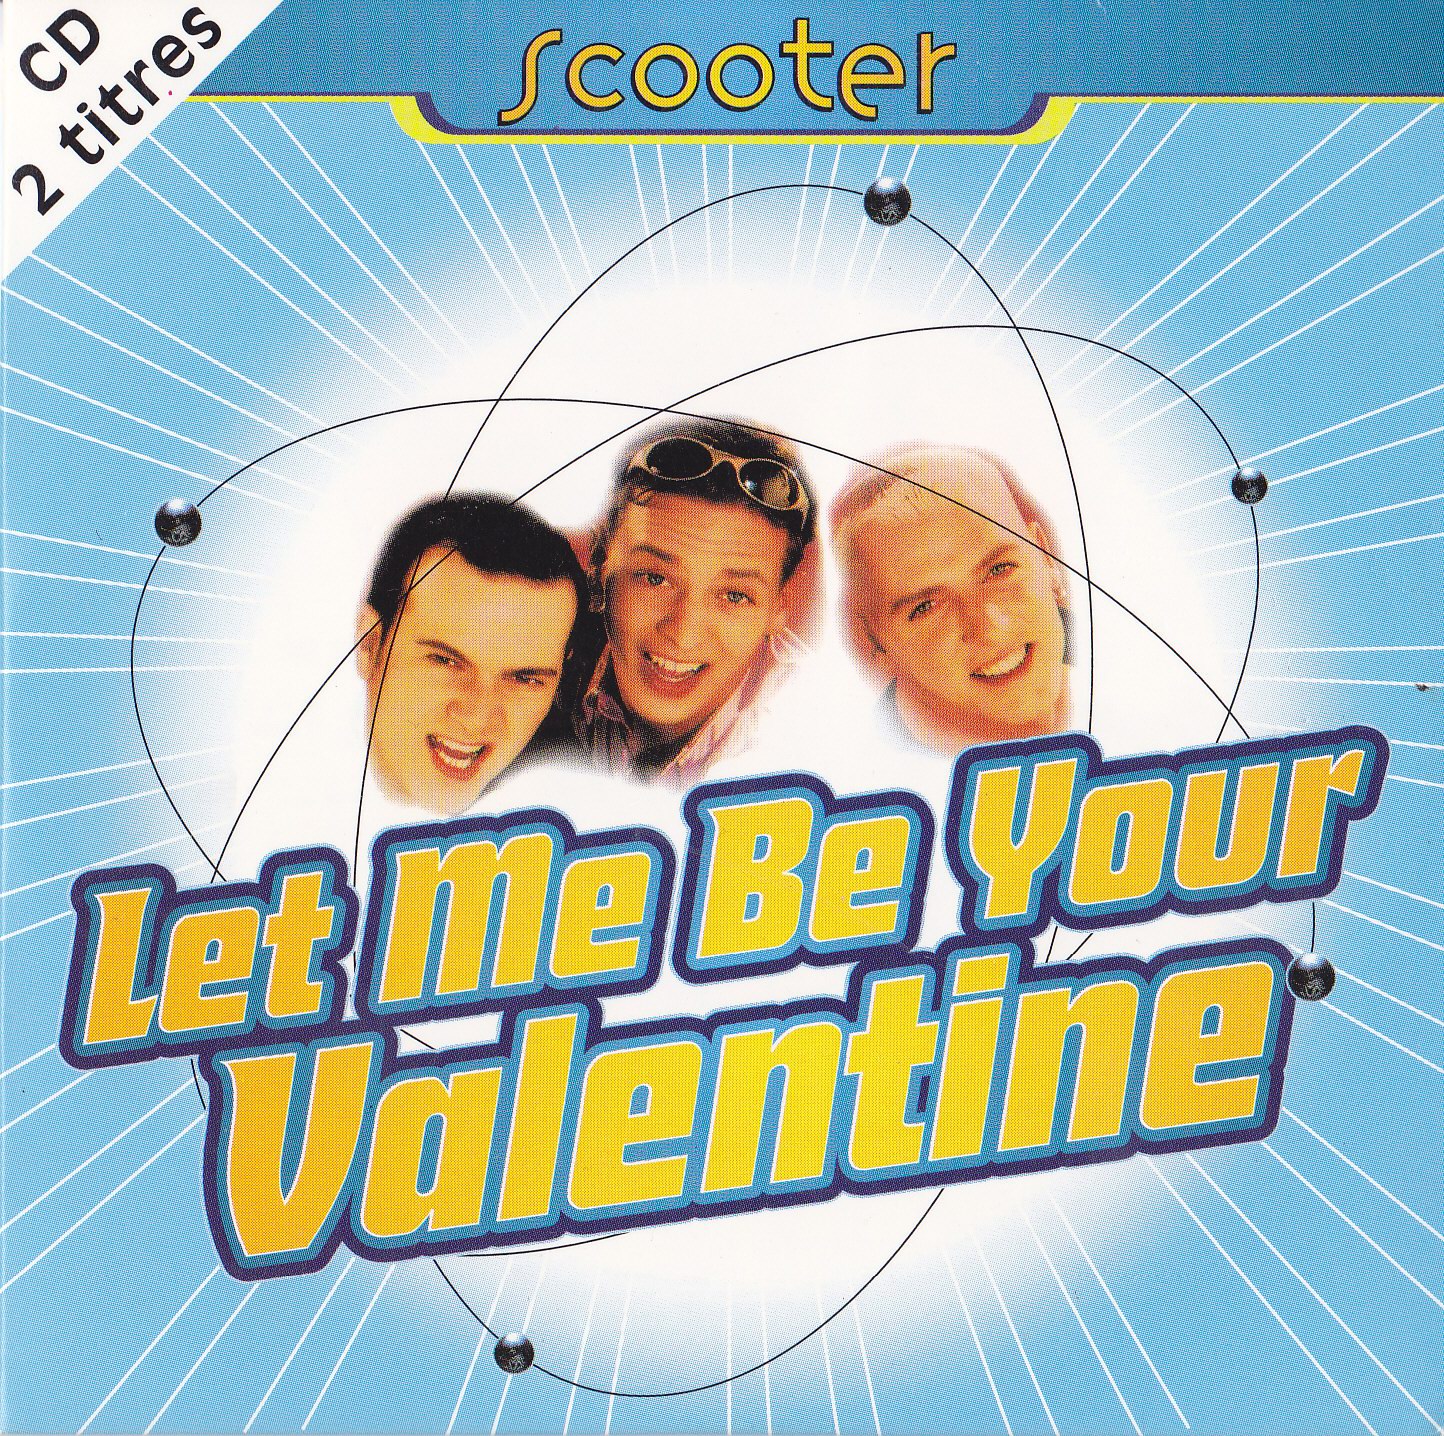 Scooter lets do it again. Scooter Let me be your Valentine 1996. Let me be your Valentine. Scooter Singles. Scooter CD.